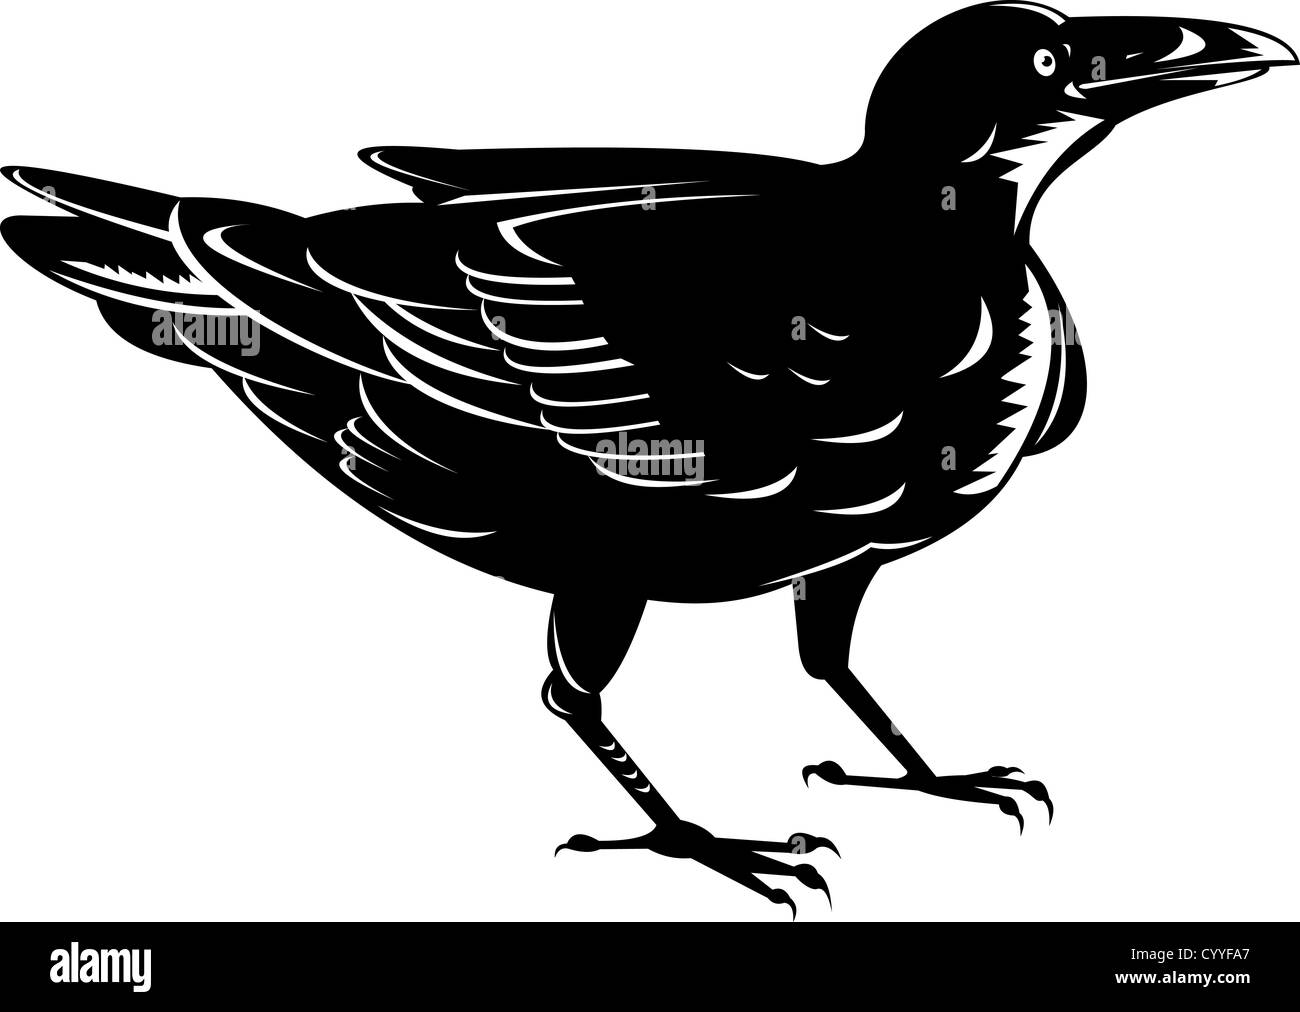 Illustration of a black raven done in retro woodcut style. Stock Photo